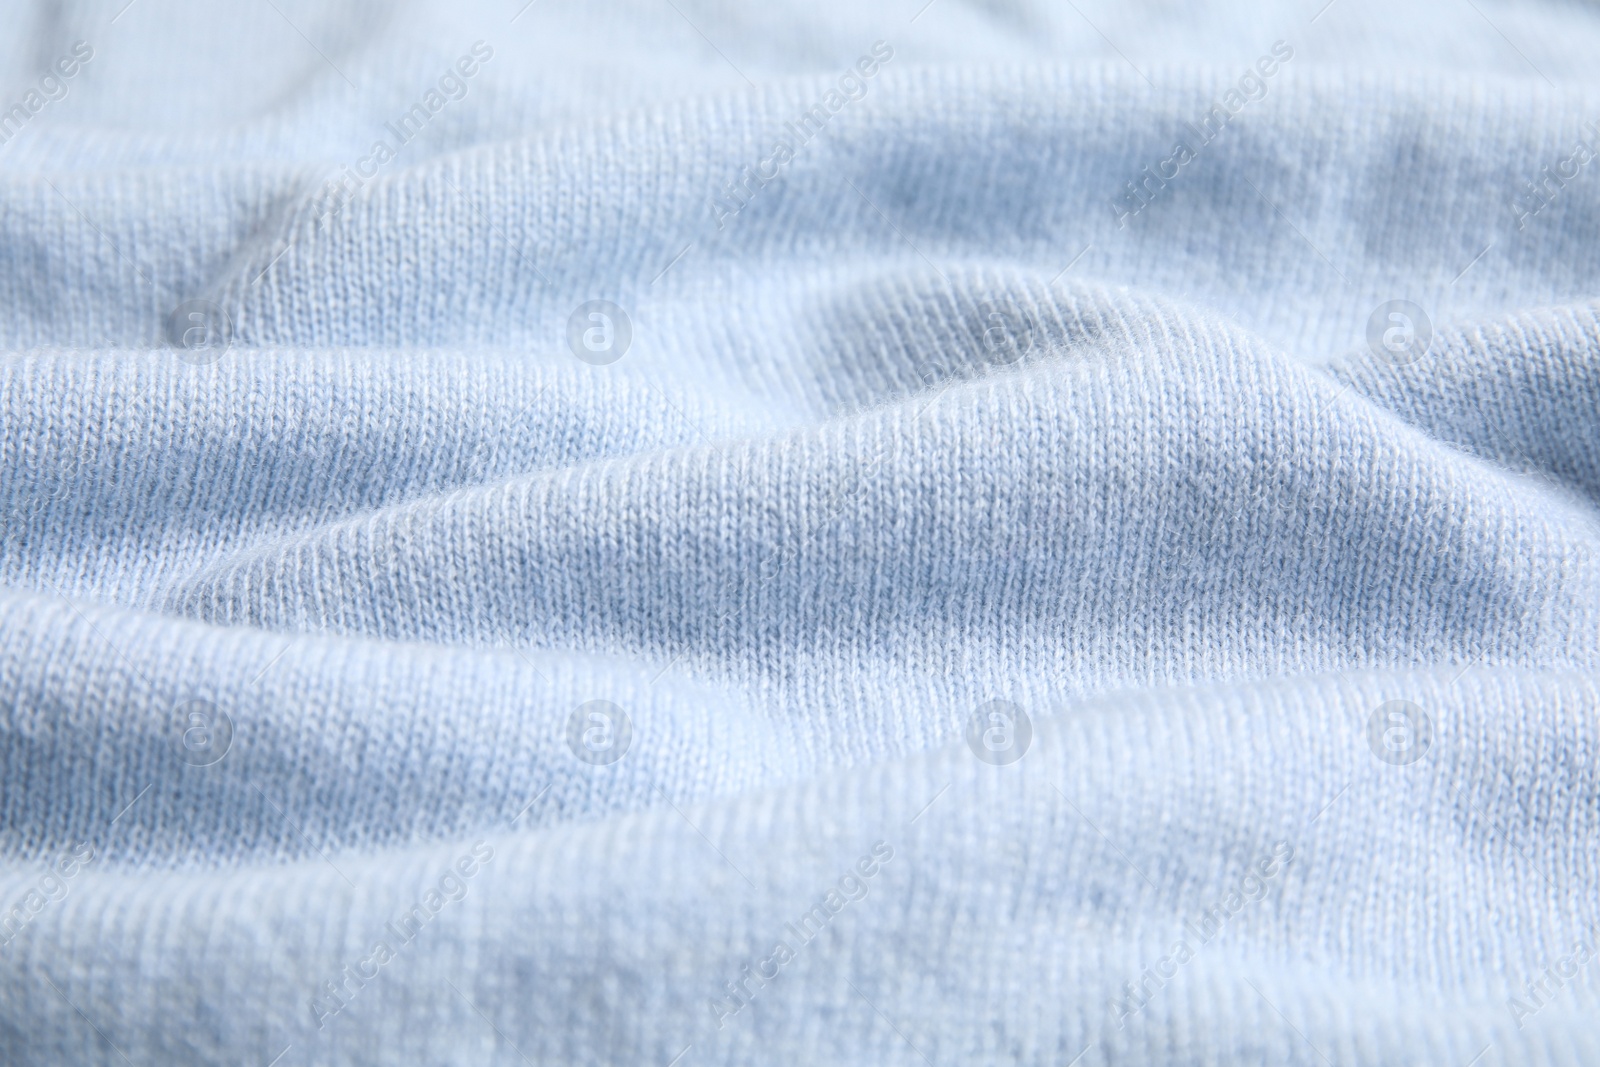 Photo of Warm cashmere sweater as background, closeup view